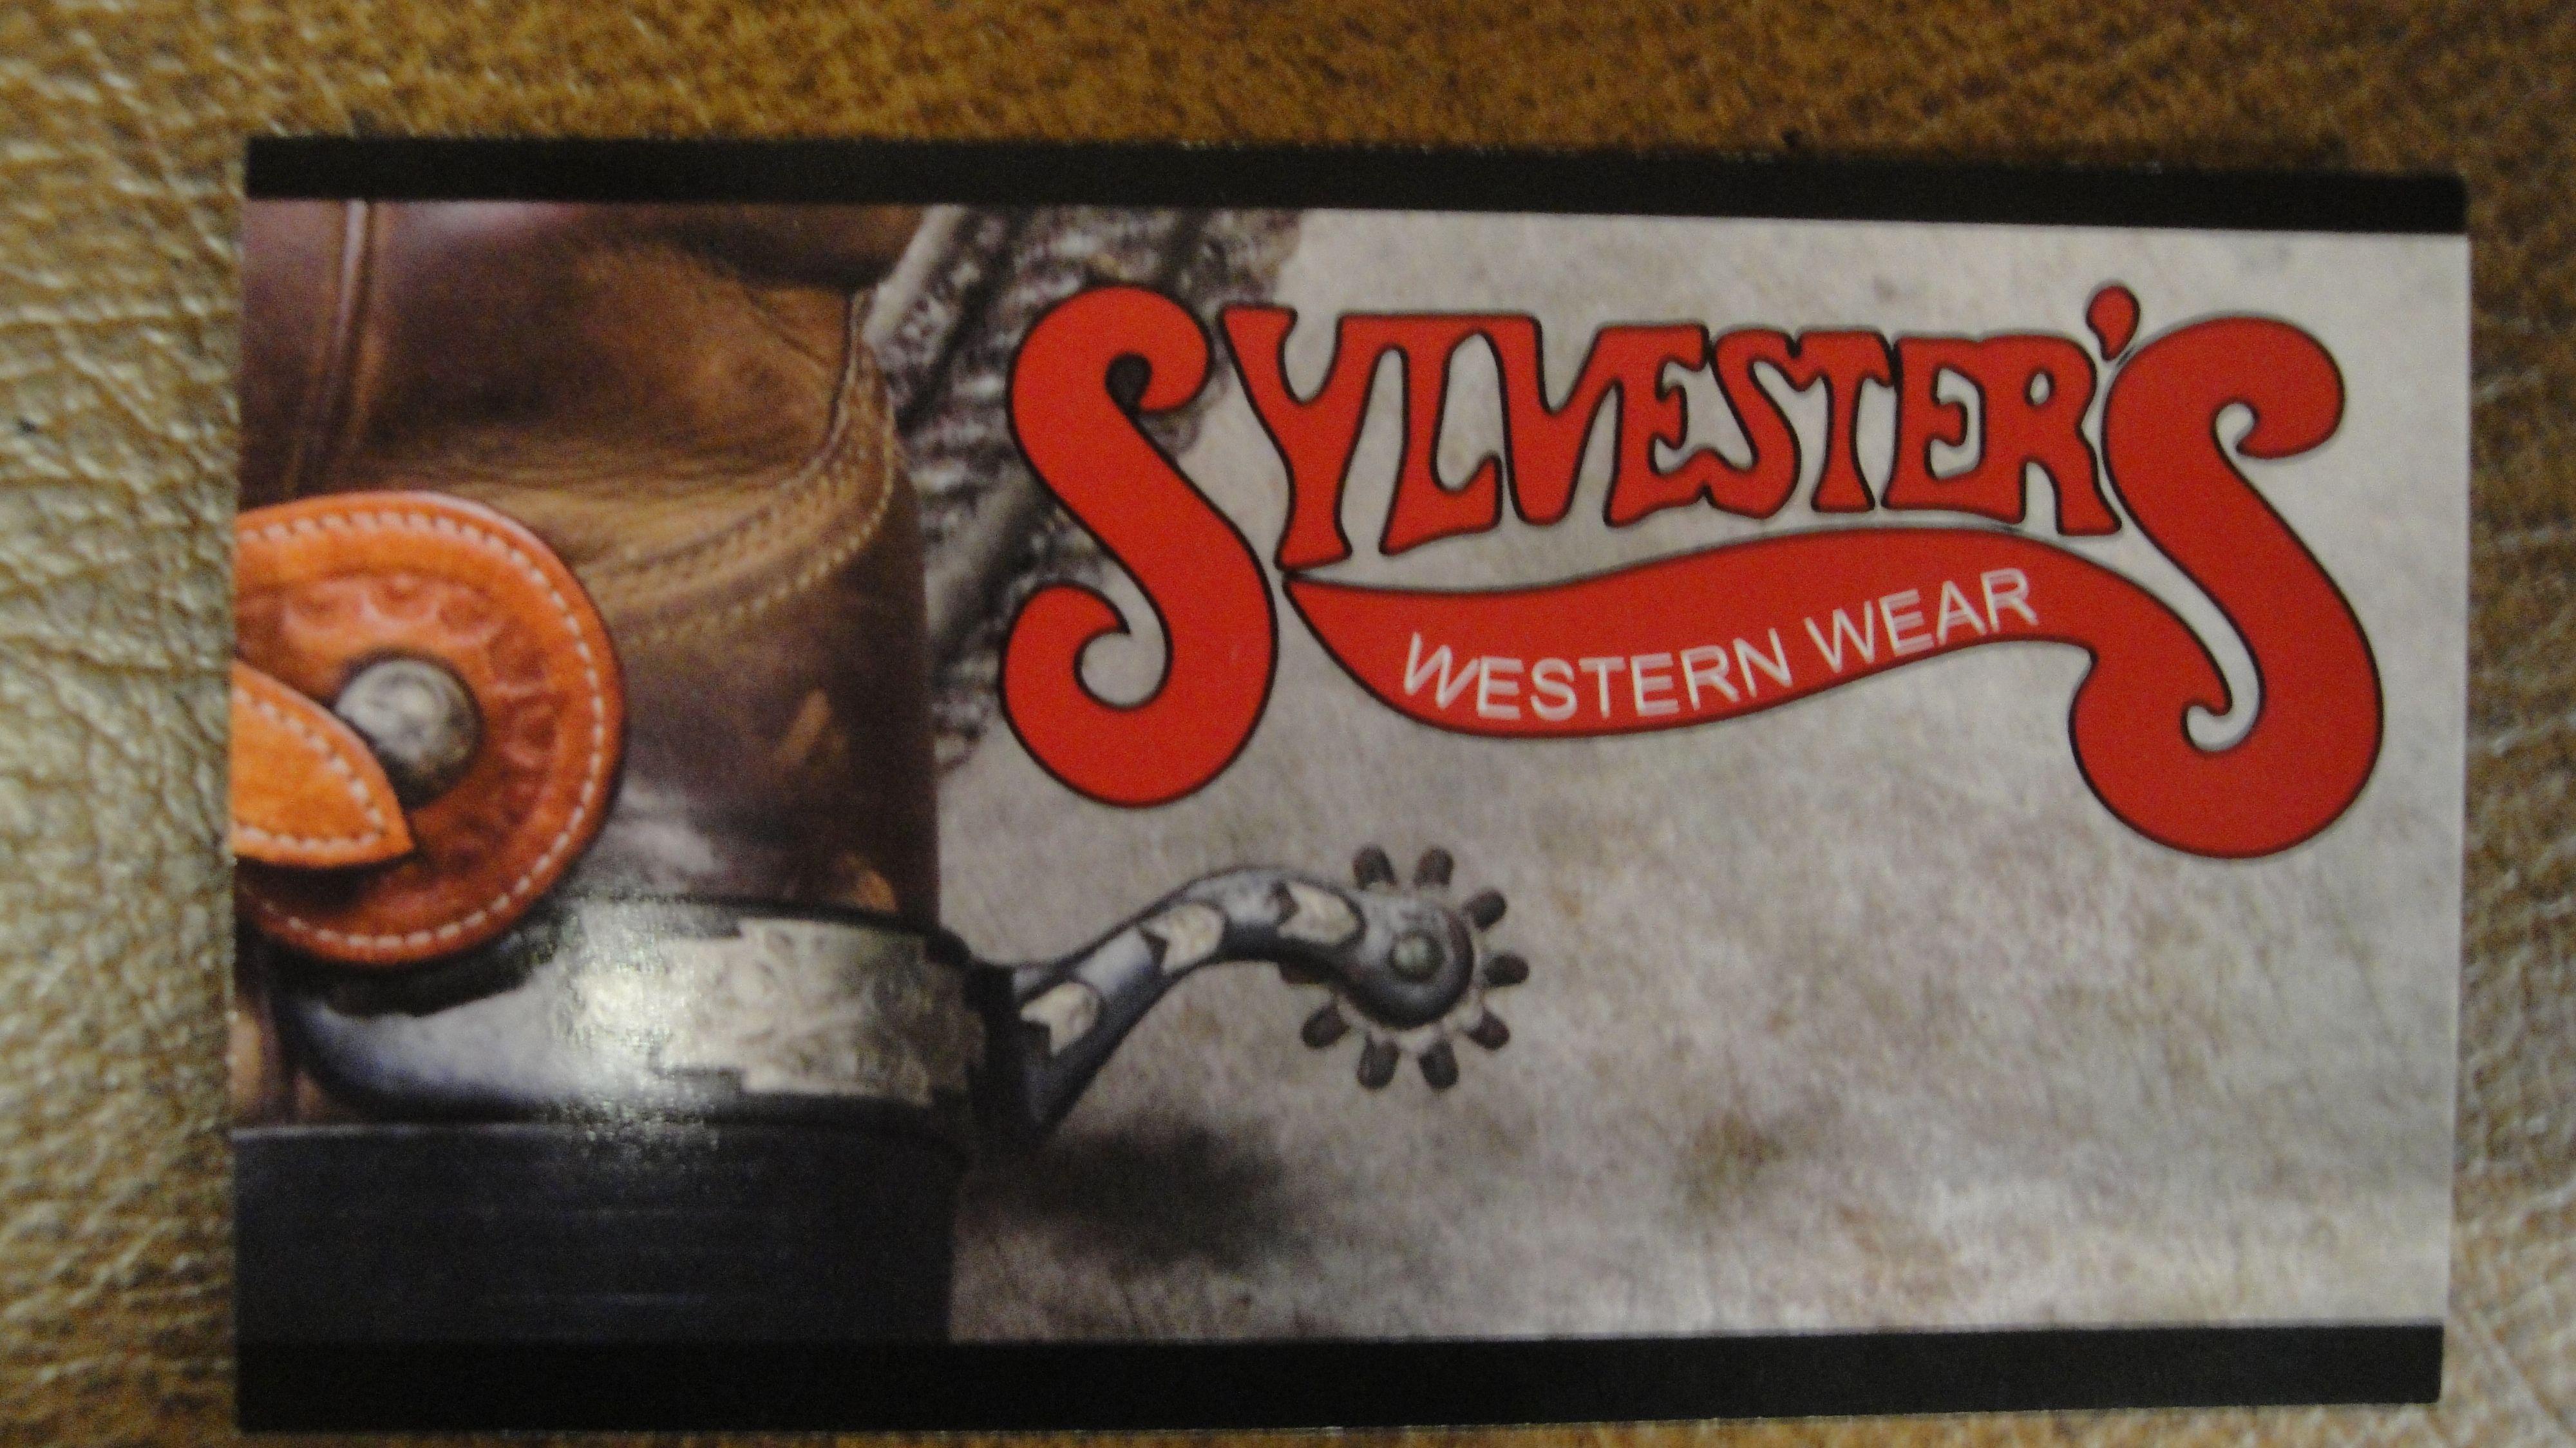 Western Clothing and Apparel Logo - Sylvester's Western Wear Apparel Store, LA 70062